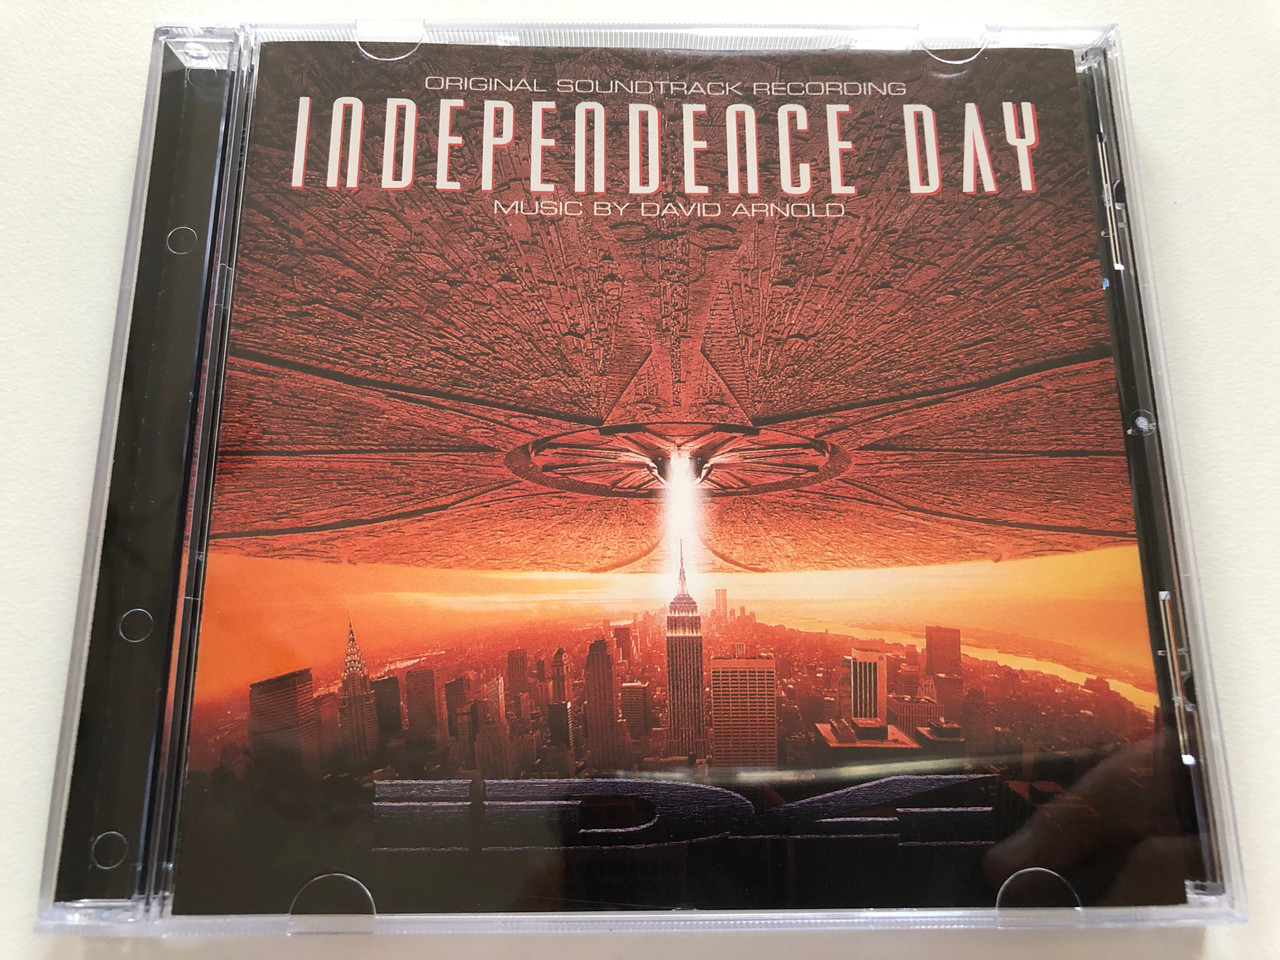 https://cdn10.bigcommerce.com/s-62bdpkt7pb/products/31181/images/183554/Independence_Day_Original_Soundtrack_Recording_-_Music_by_David_Arnold_RCA_Victor_Audio_CD_1996_09026_68564_2_1__69018.1625598520.1280.1280.JPG?c=2